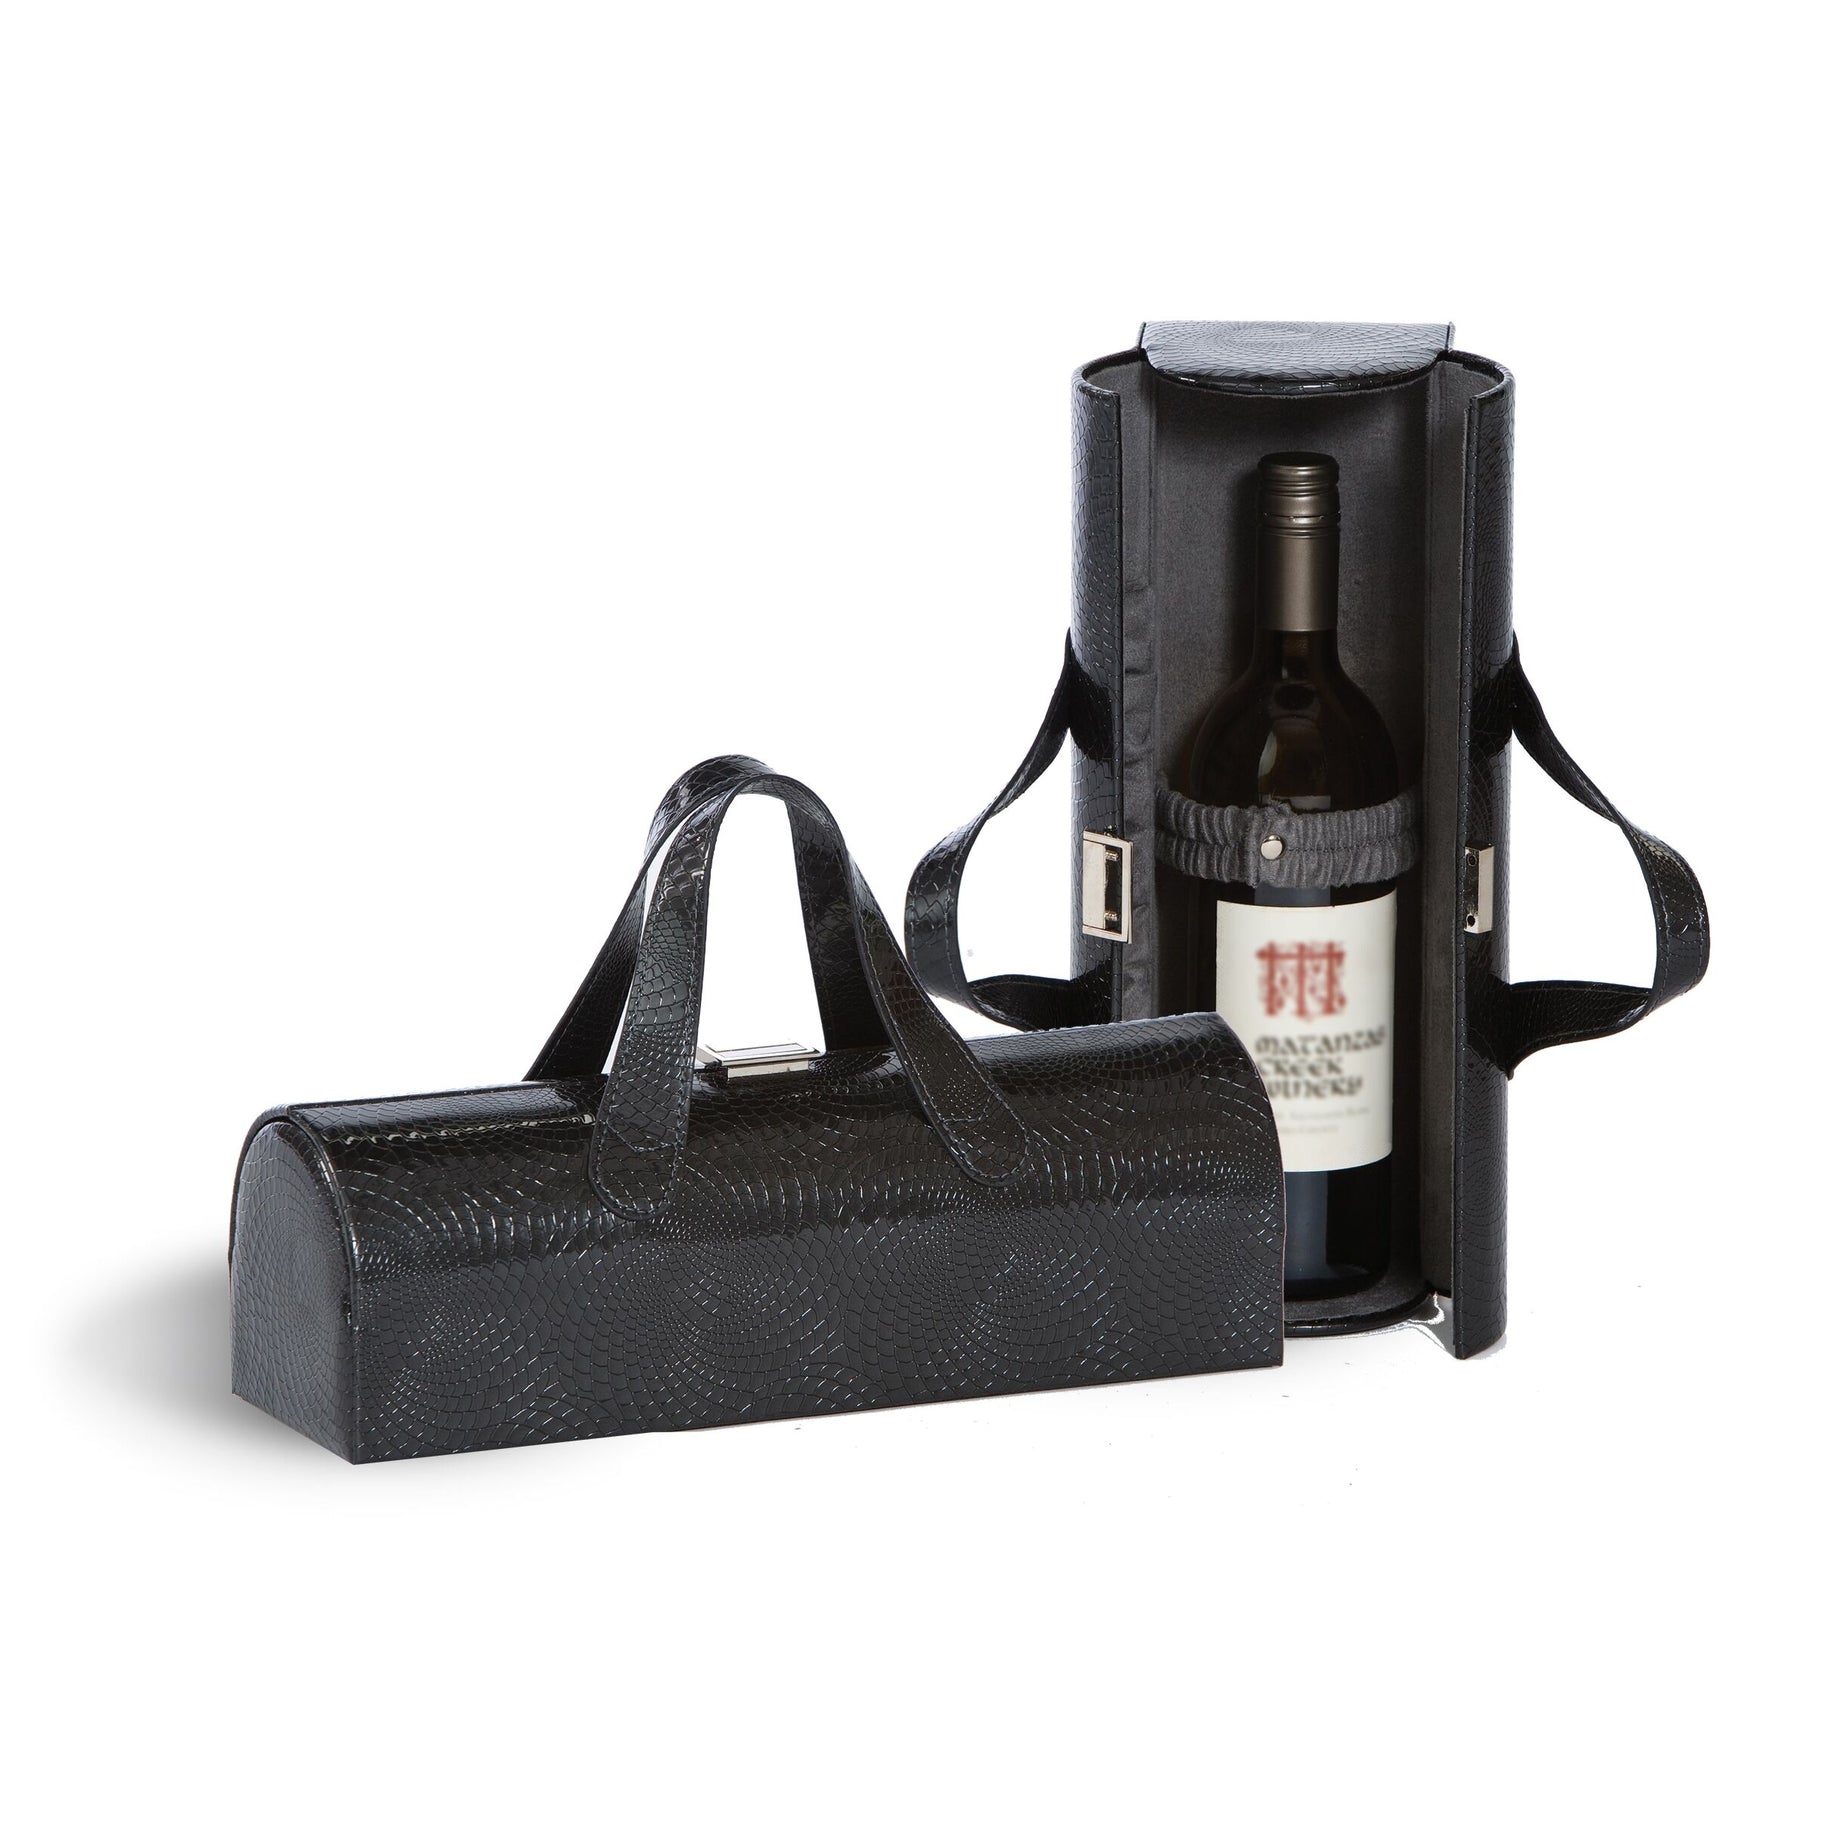 Wholesale Multi Colored Felt Wine Tote Bag 40x14cm Bottle Carrier For Wine,  Beer, And Gifts Perfect For Outdoor Parties And Wine Key Storage From  Sjnp05, $1.36 | DHgate.Com